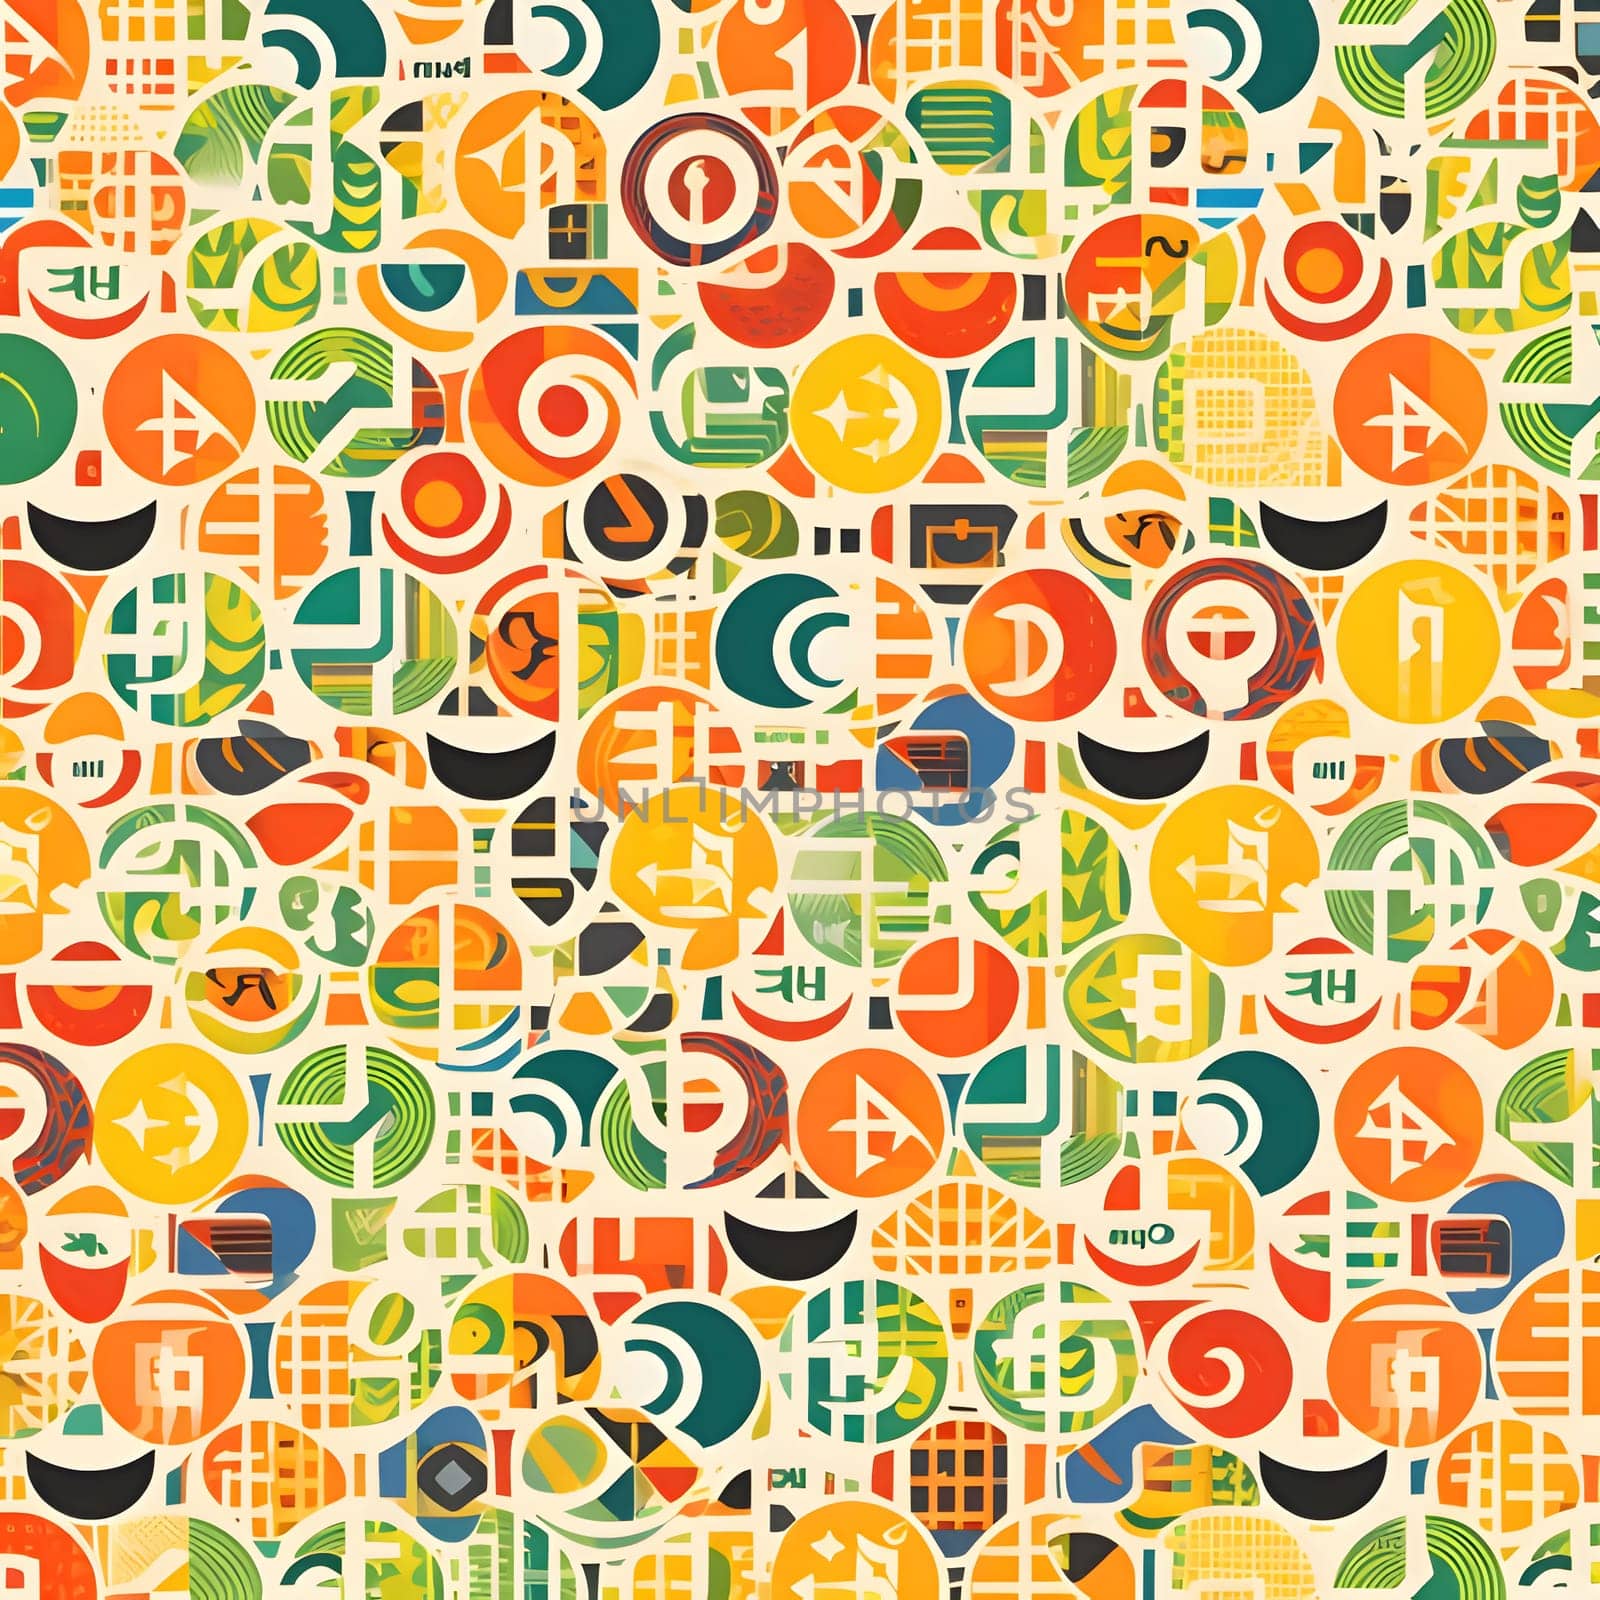 Patterns and banners backgrounds: Seamless pattern with symbols of the world. Vector illustration.